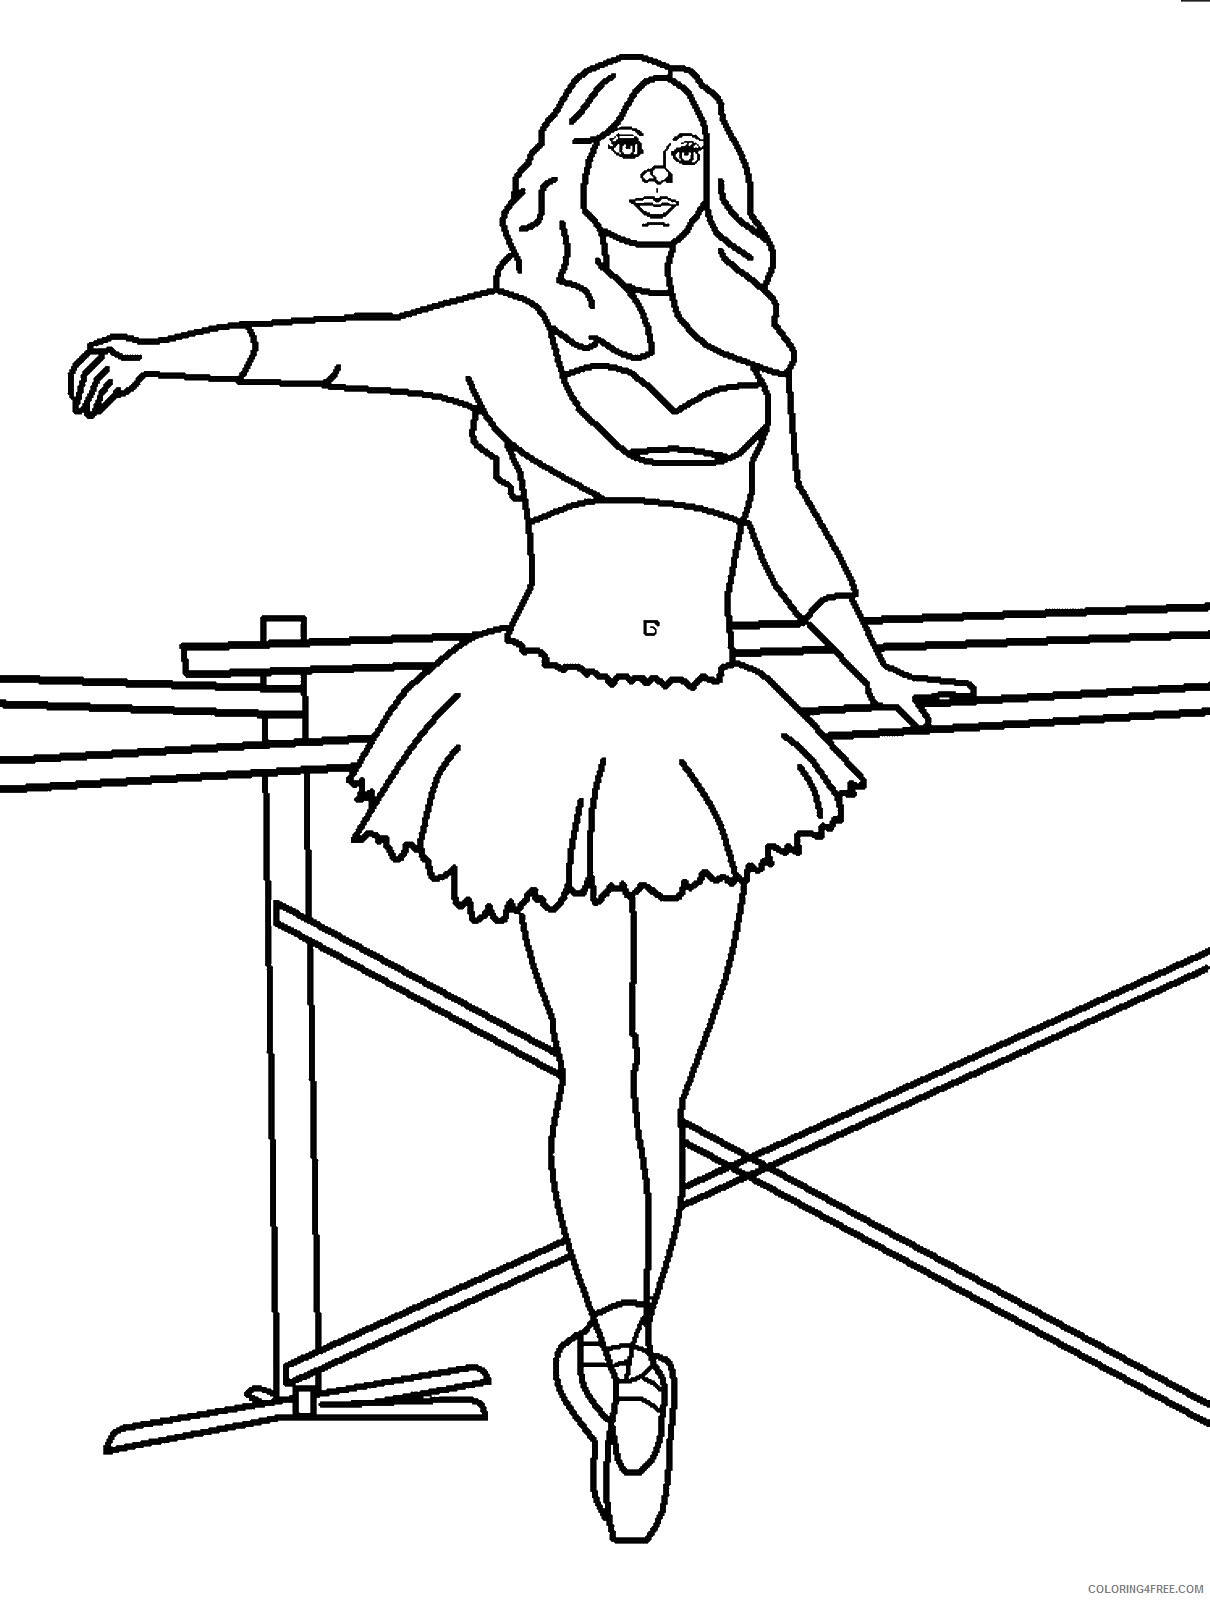 Ballerina Coloring Pages ballerinac55 Printable 2021 0485 Coloring4free